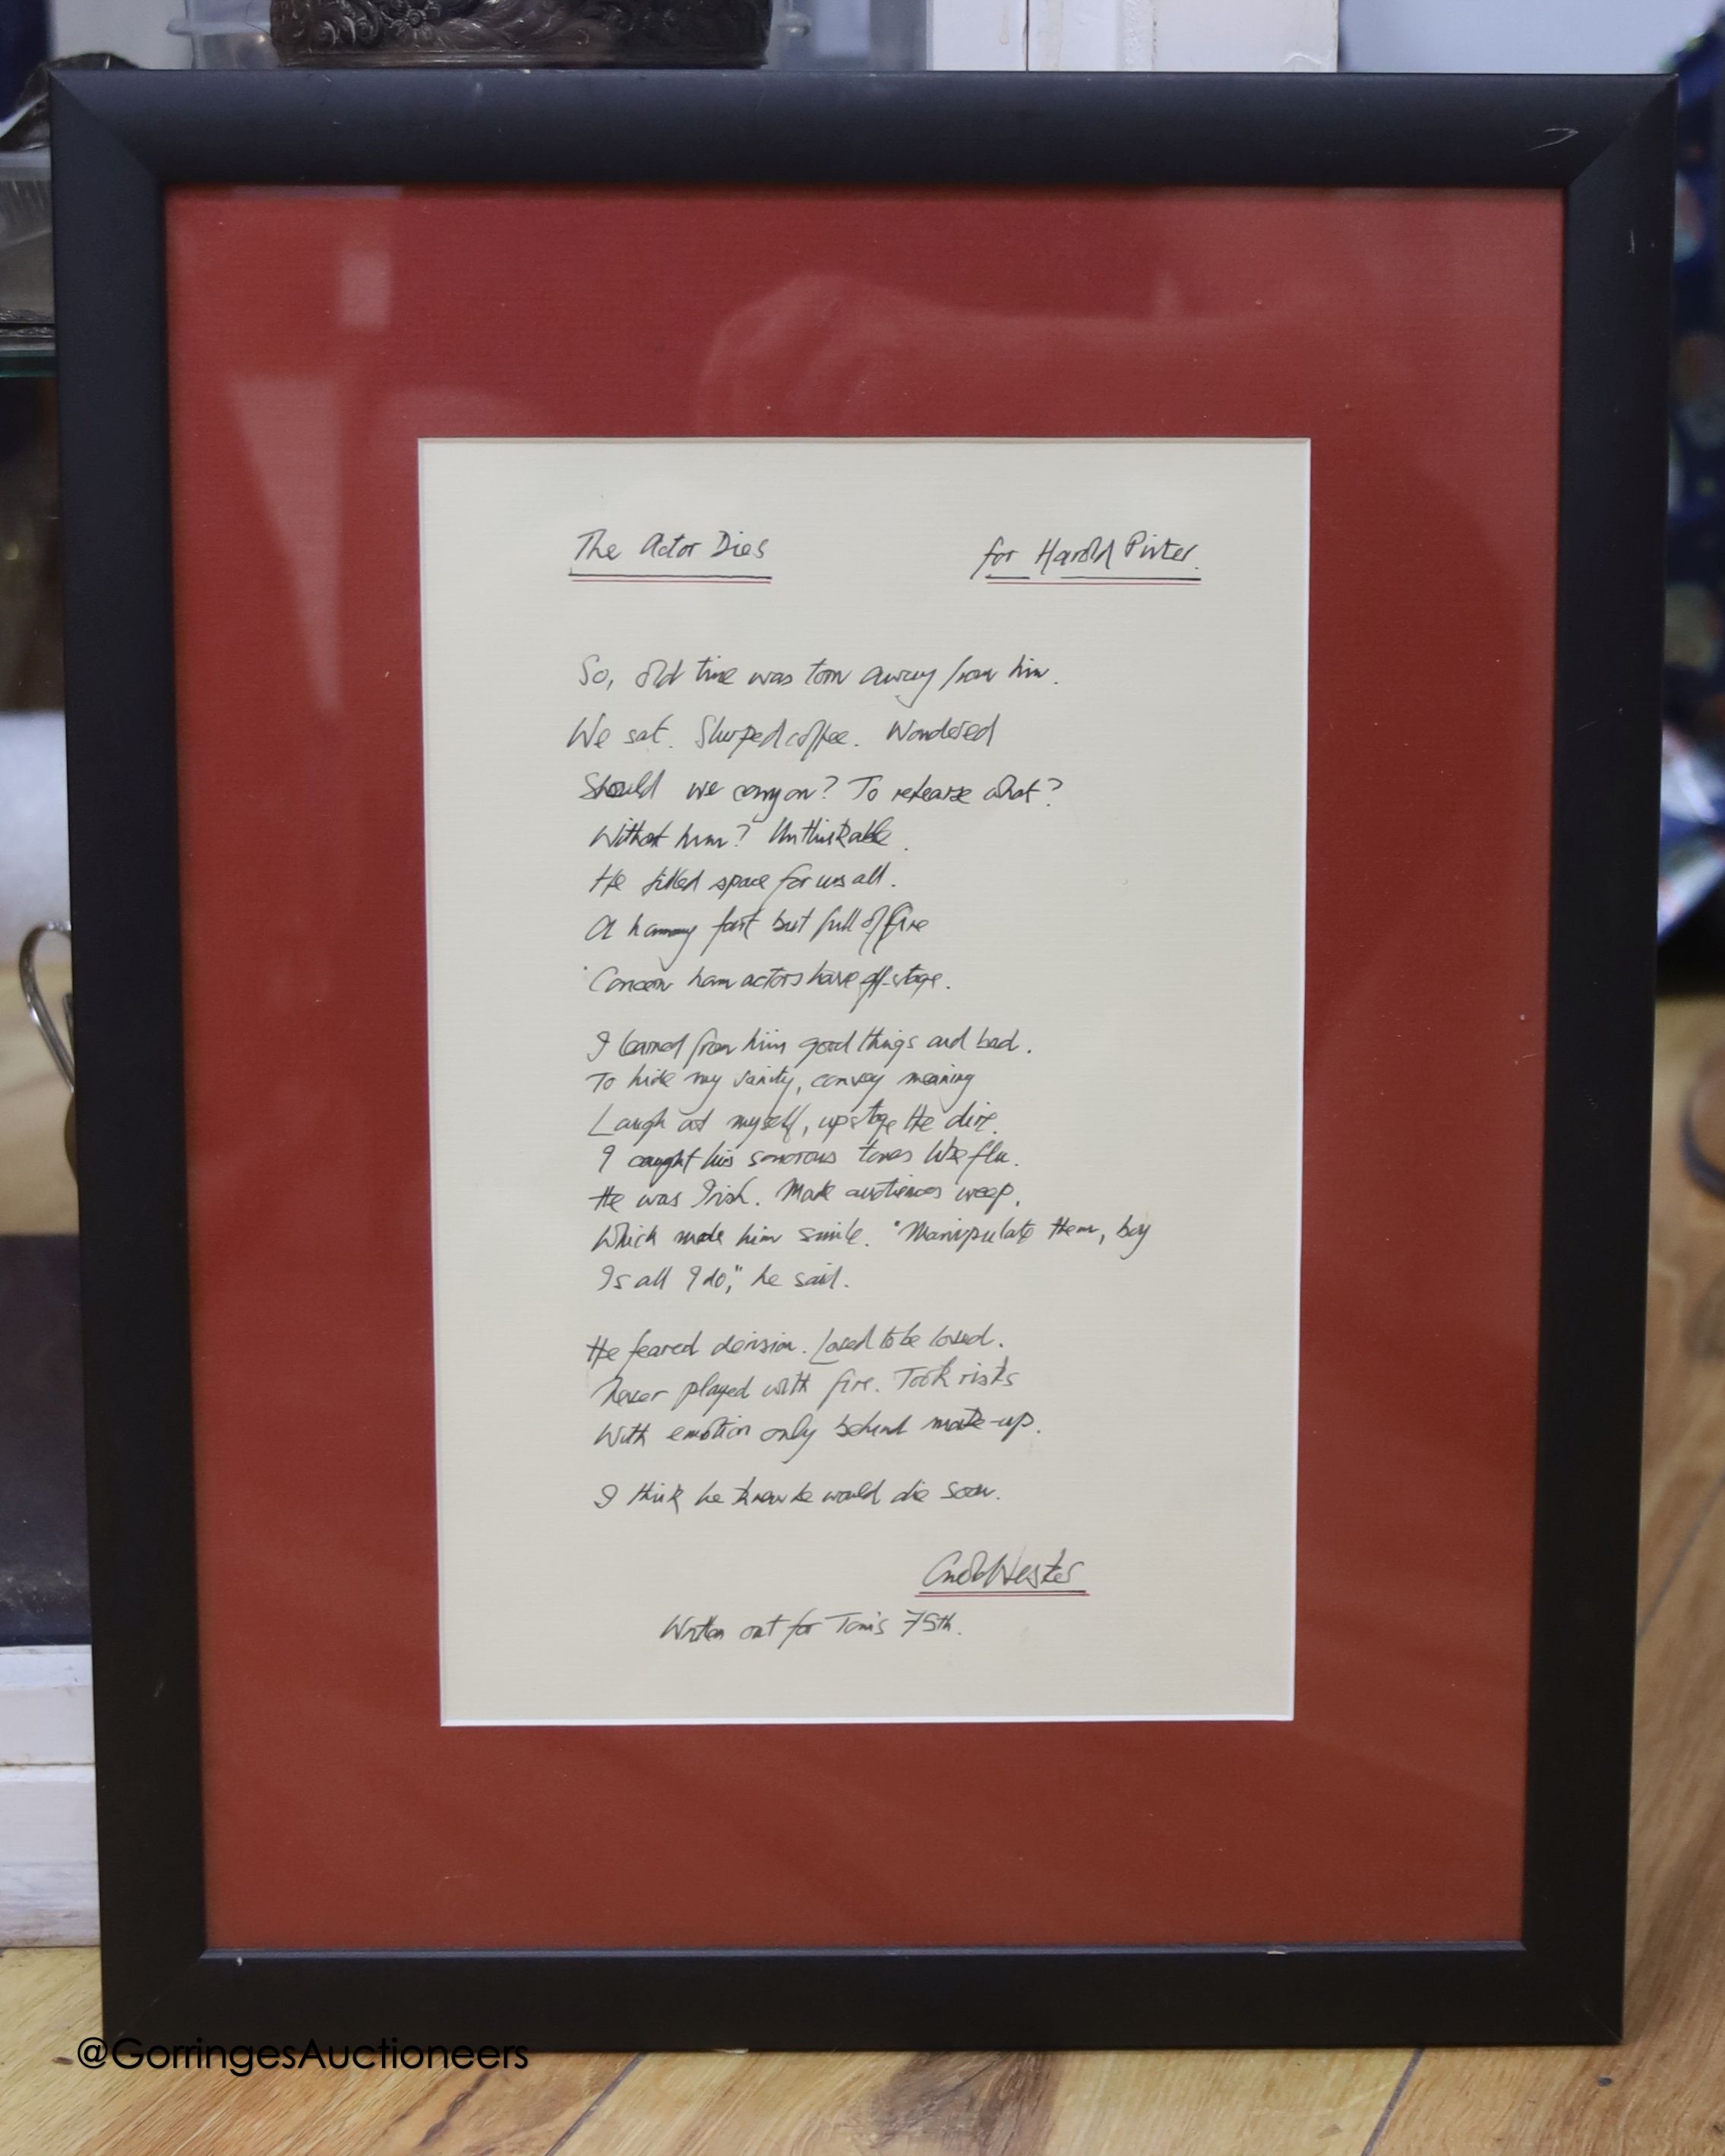 Carol Webster, A handwritten poem The Actor Dies for Harold Pinter, inscribed at the bottom '